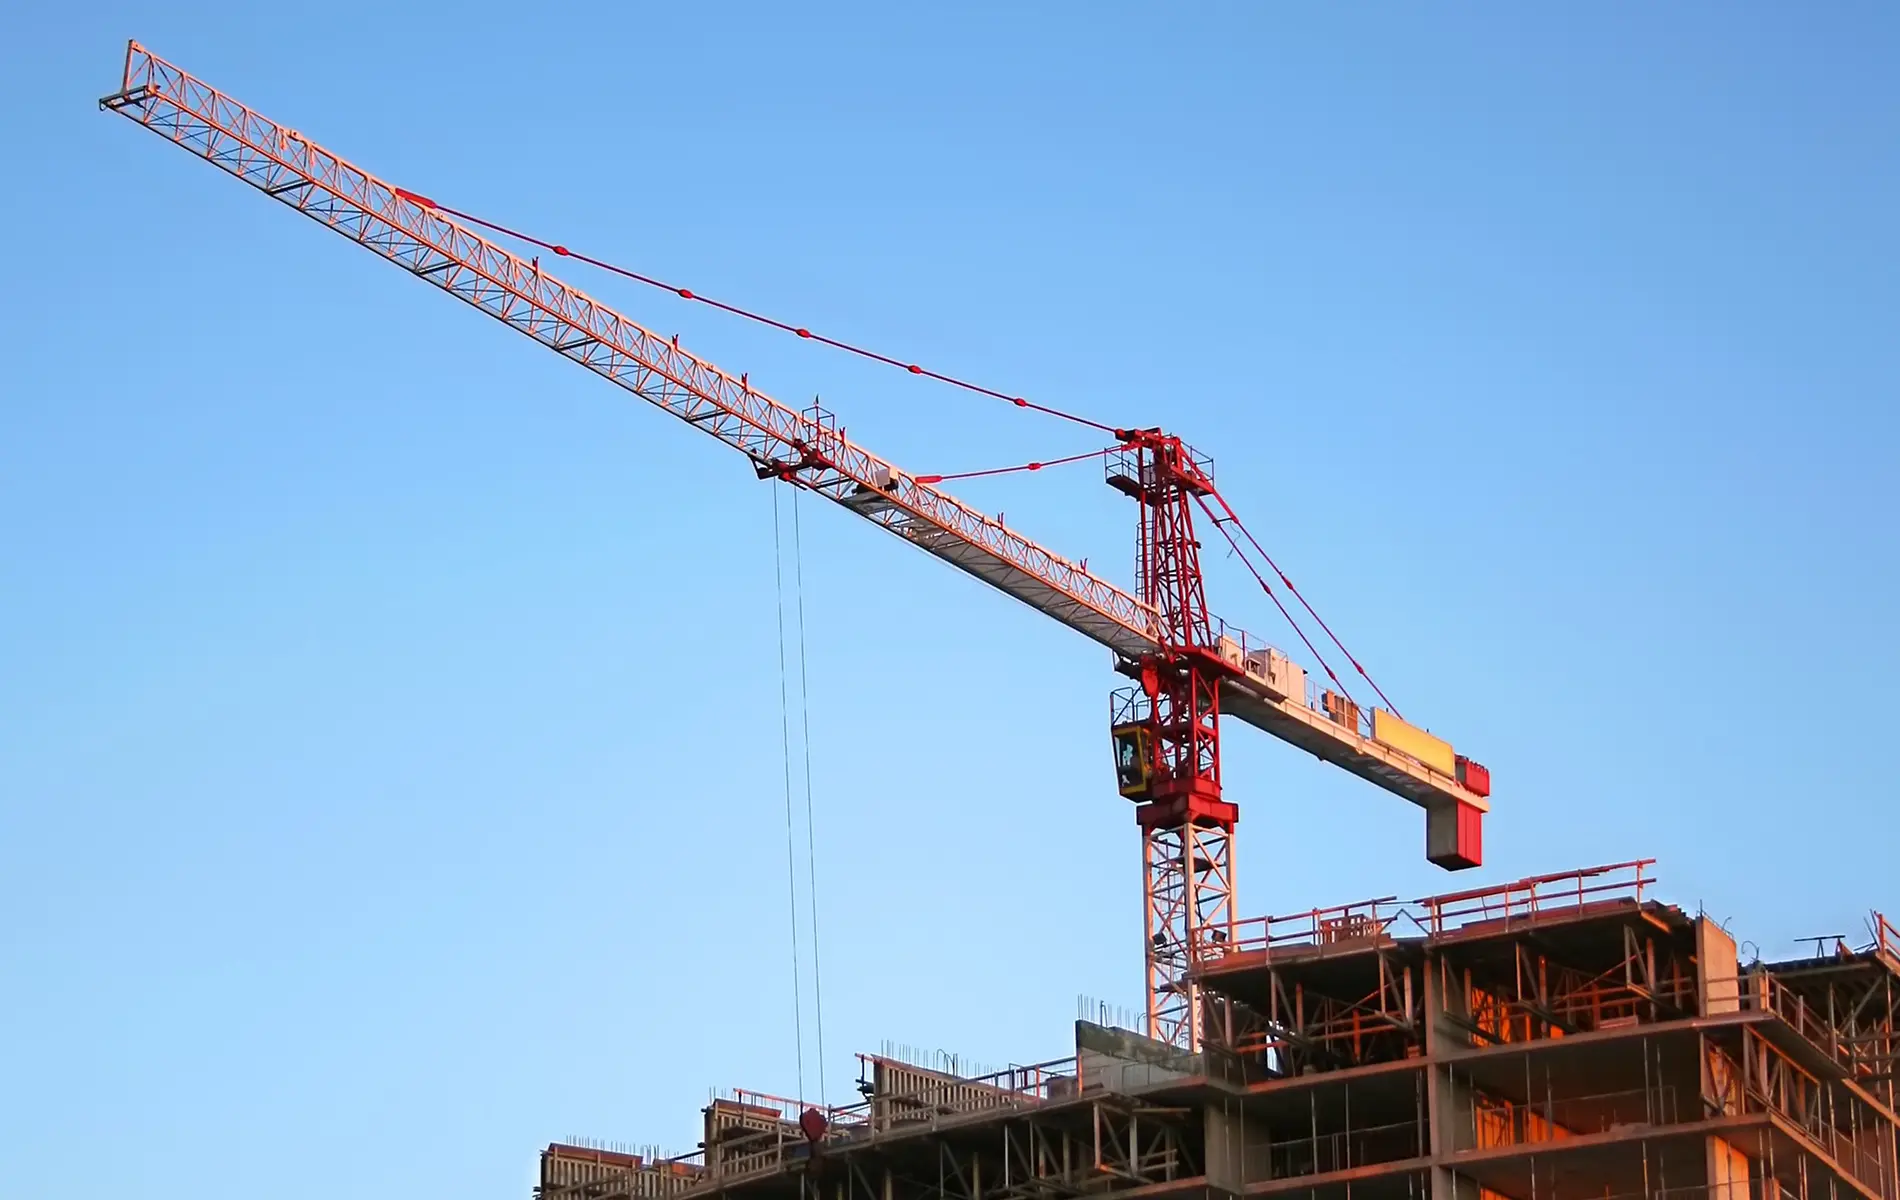 Hydraulics in the Crane industry